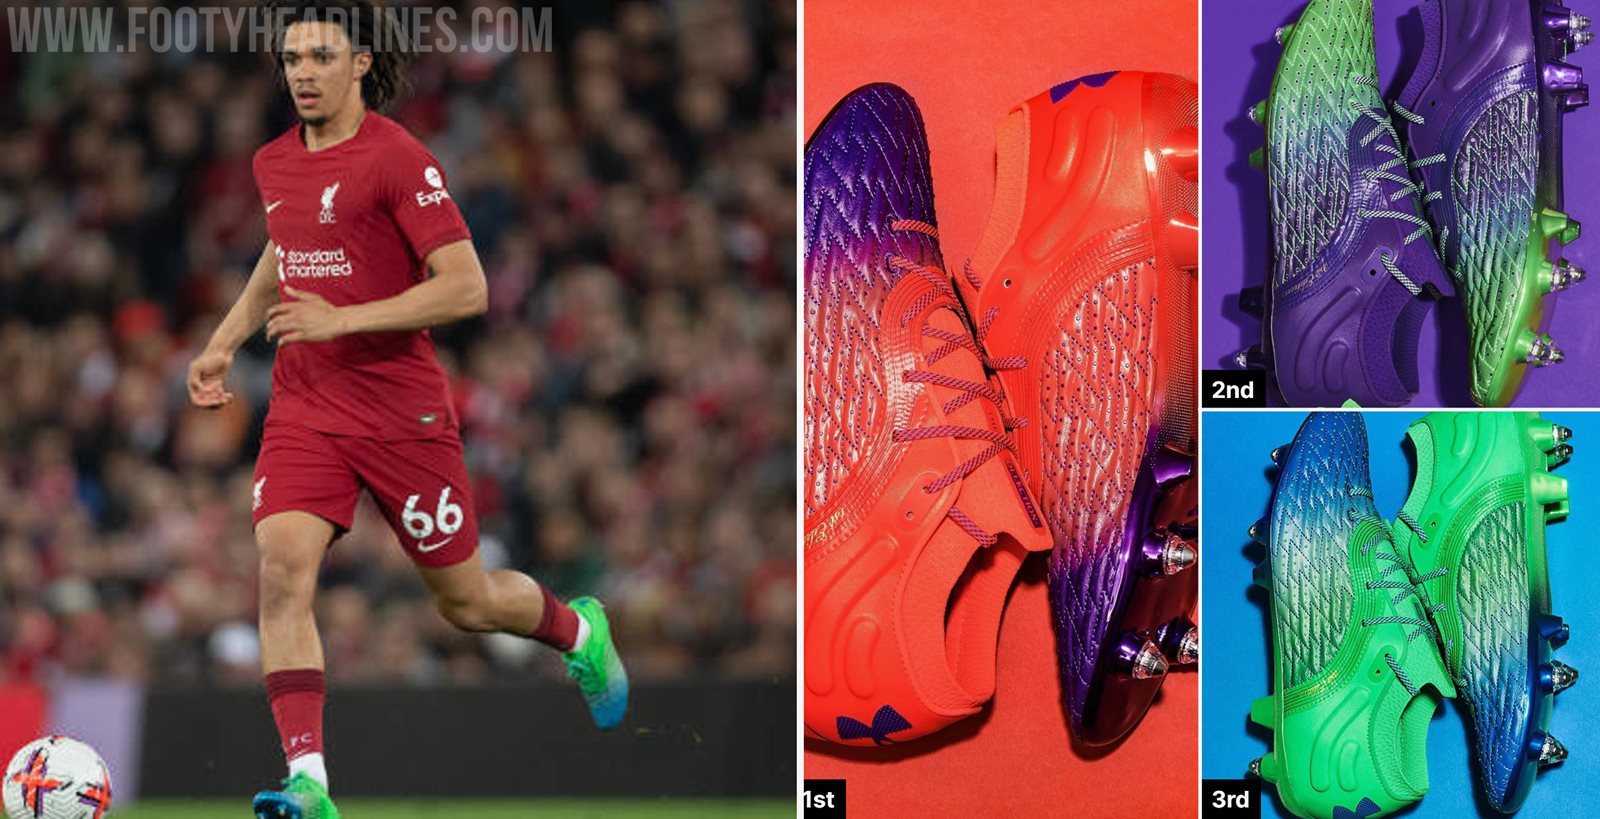 3rd Under Armour 'The 66' Alexander-Arnold Signature Boots Released ...